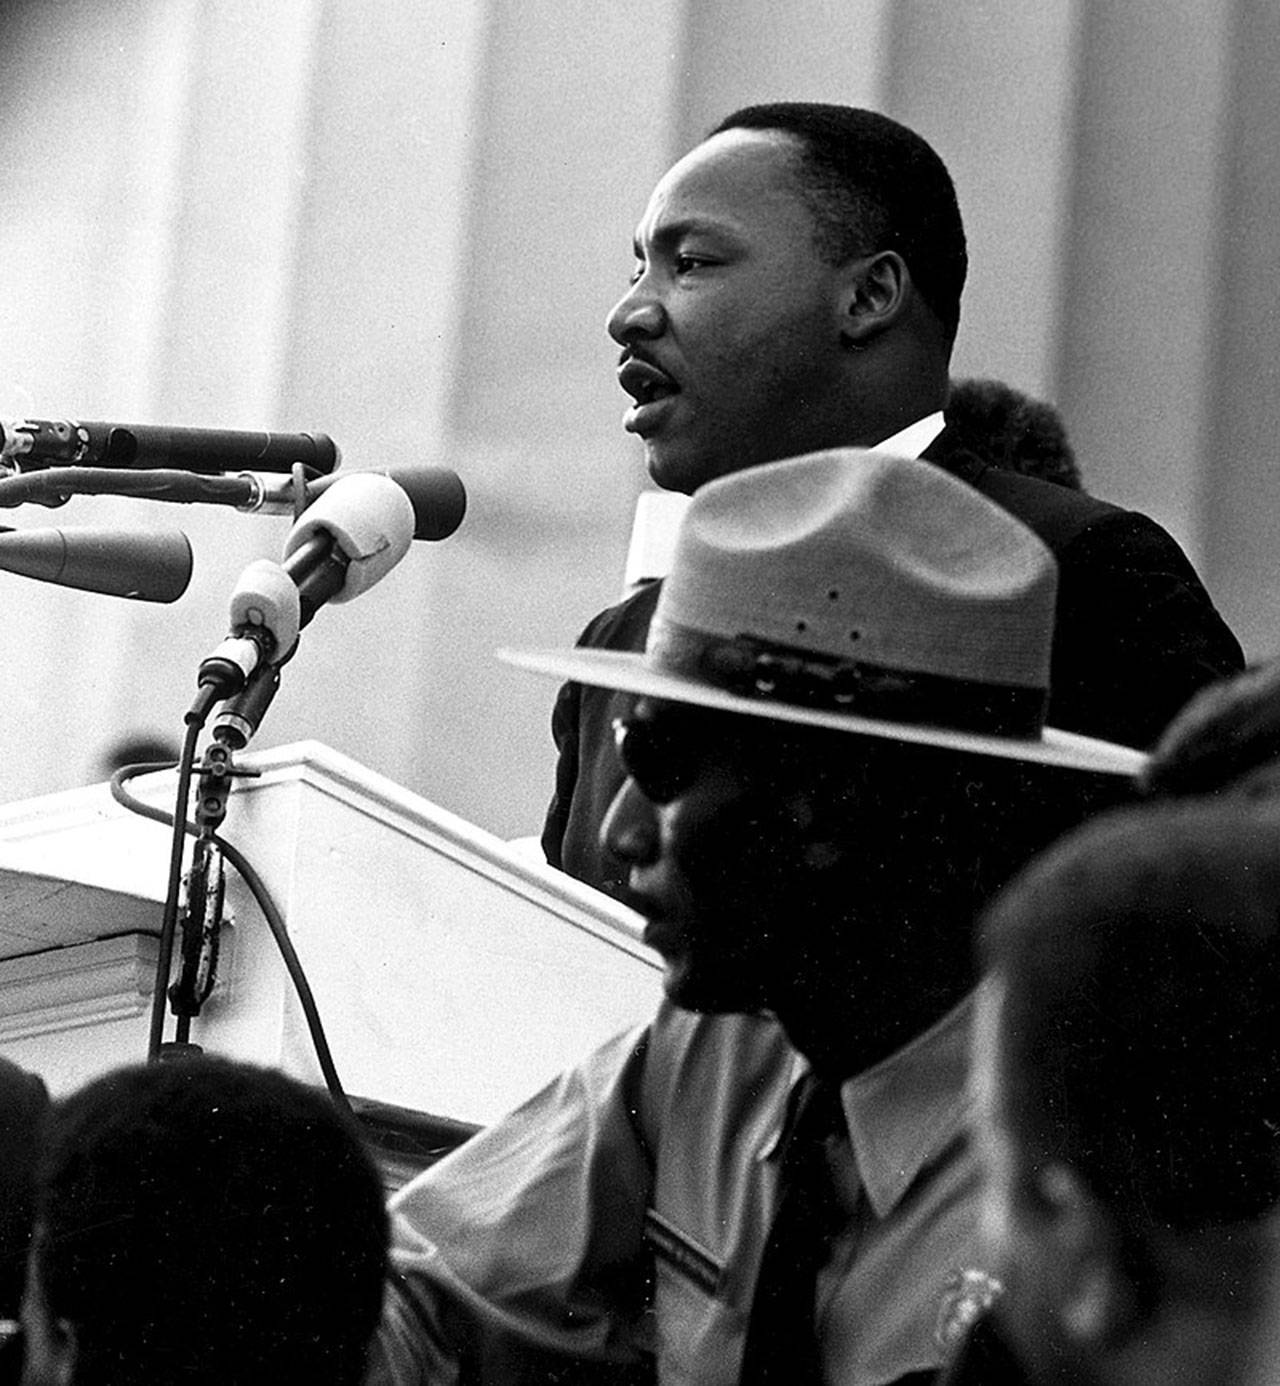 The Rev. Dr. Martin Luther King Jr. makes his “I Have a Dream” speech on Aug. 28, 1963 during the March on Washington. (National Archives)